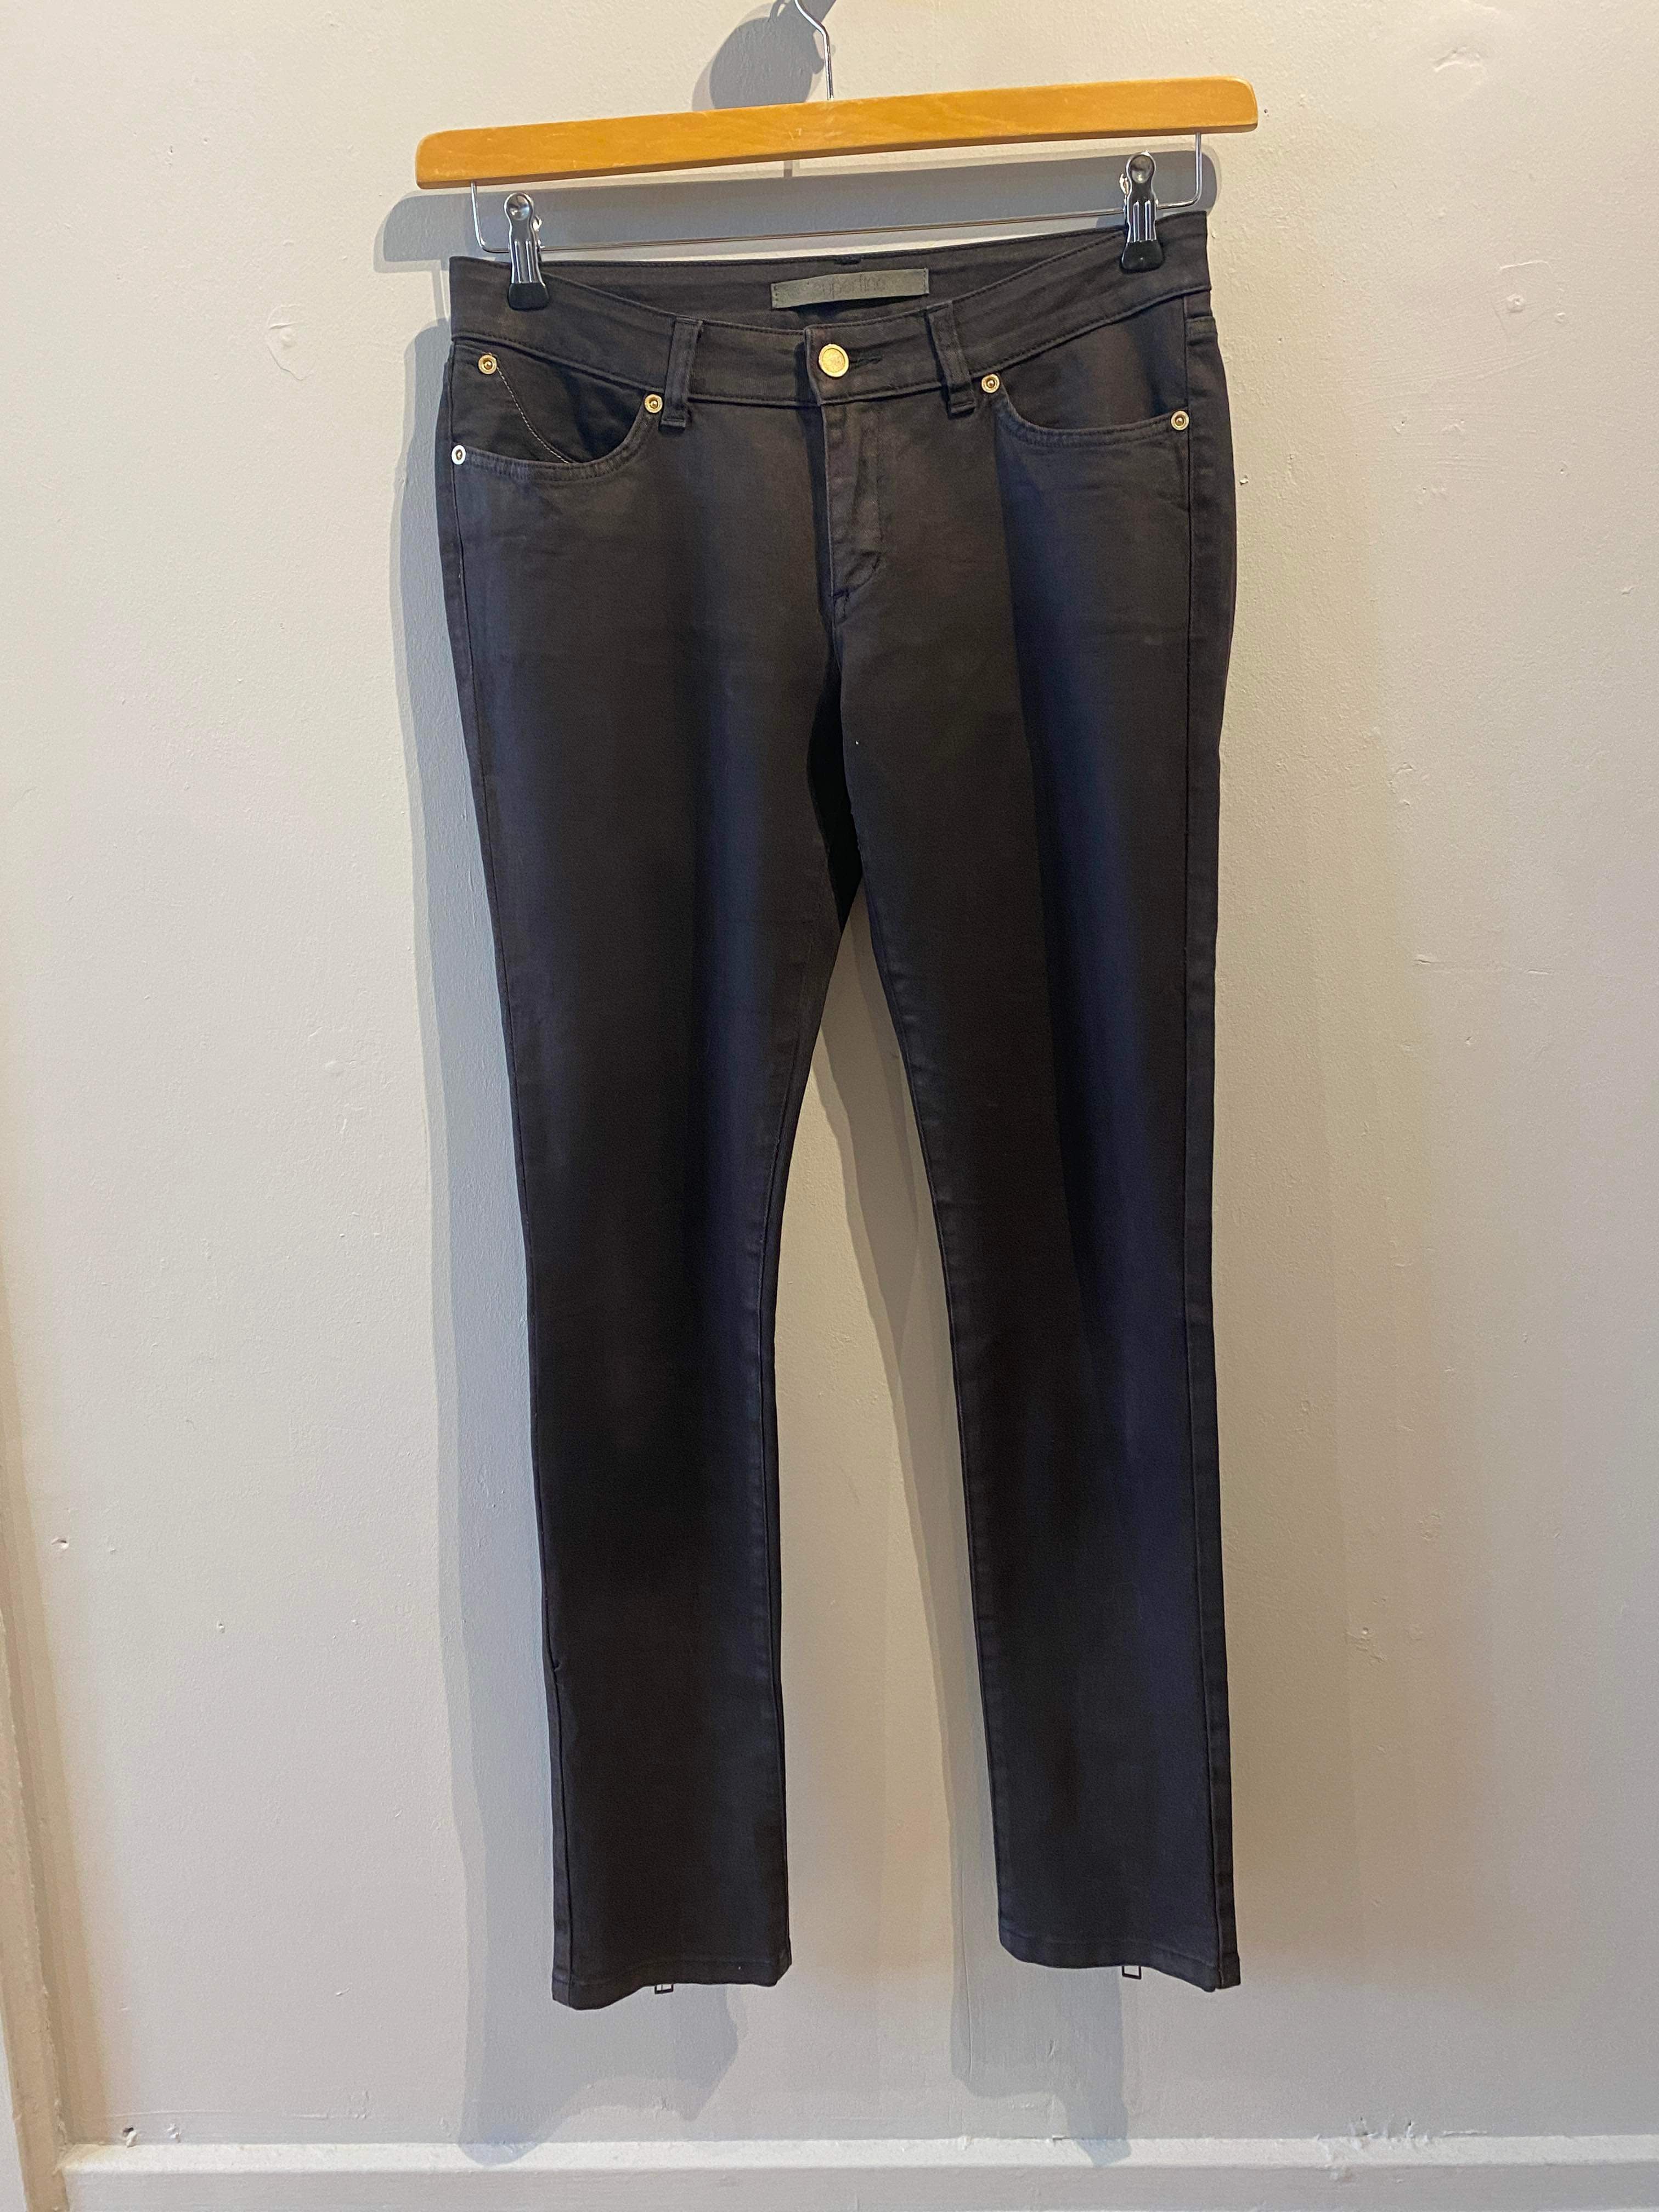 Superfine - Jeans - Size: 29